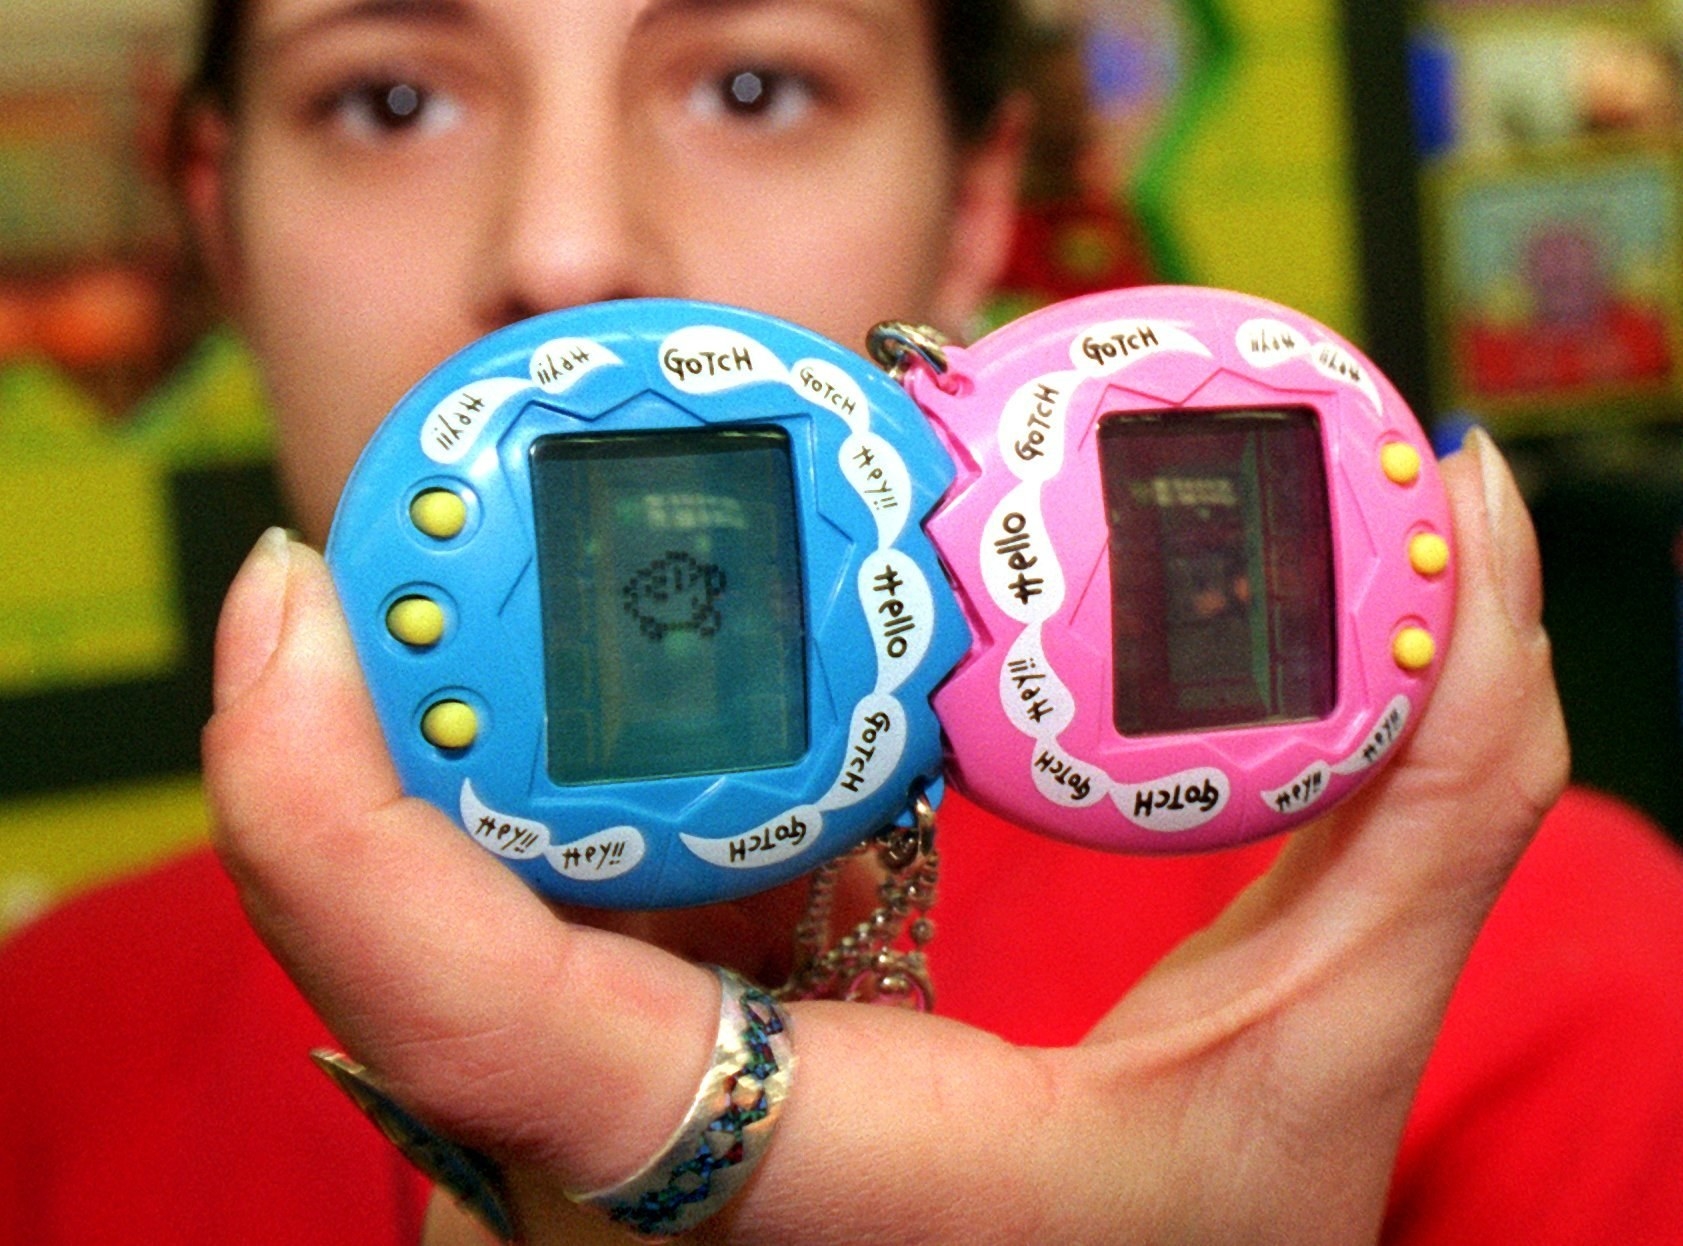 A girl holds up two Tamagotchis